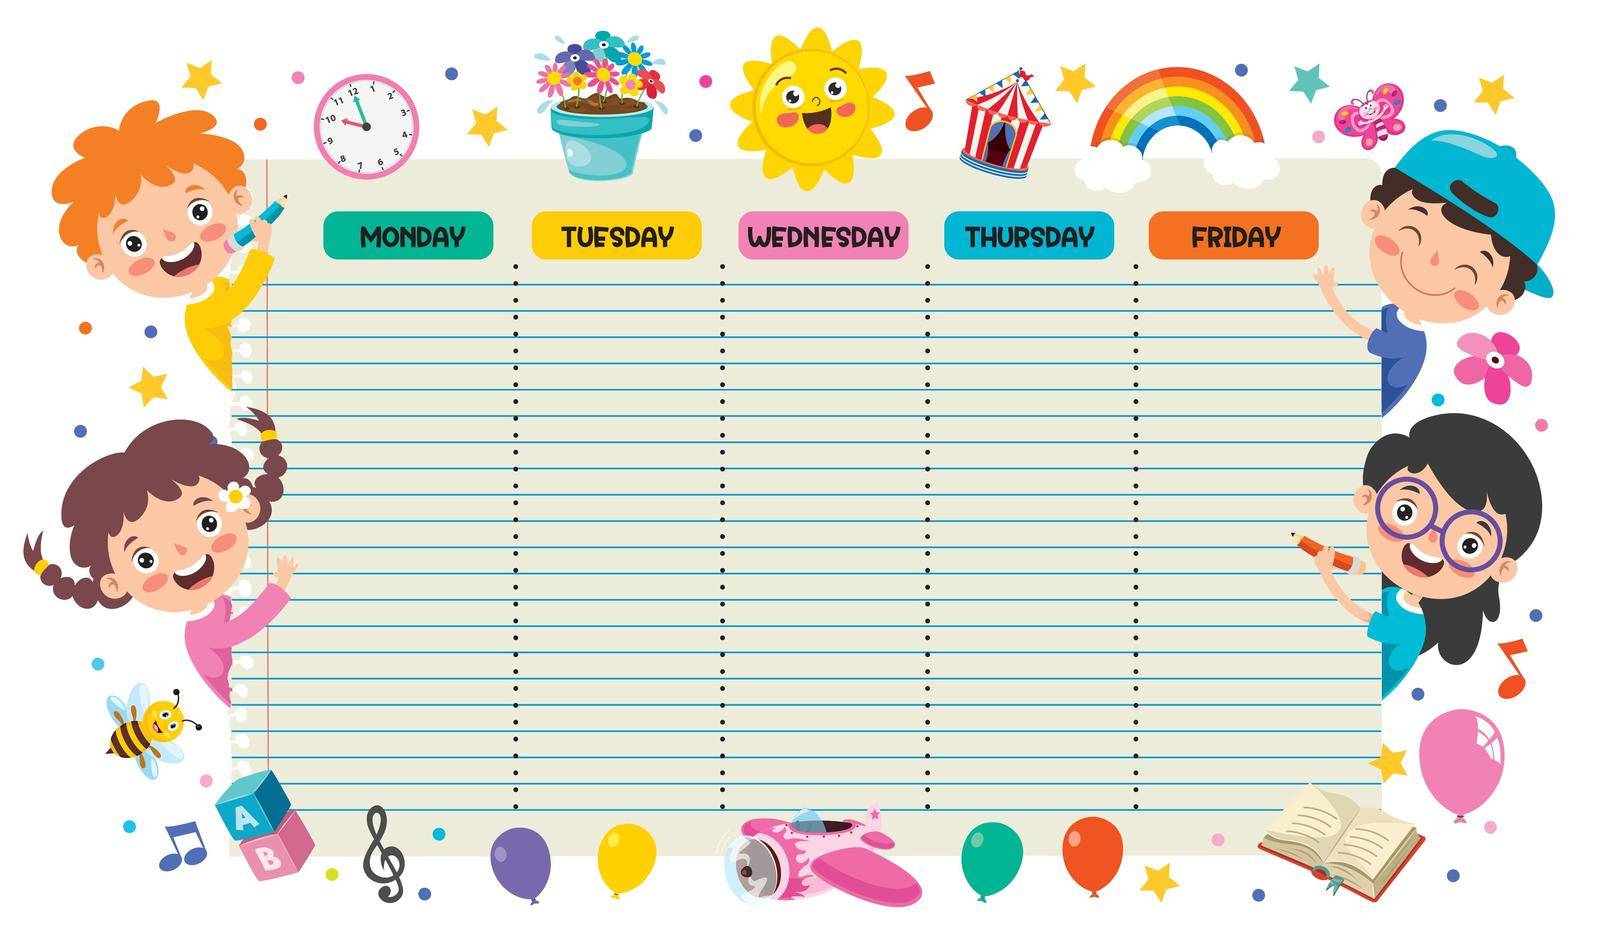 Daily And Weekly Planner For Children by yusufdemirci